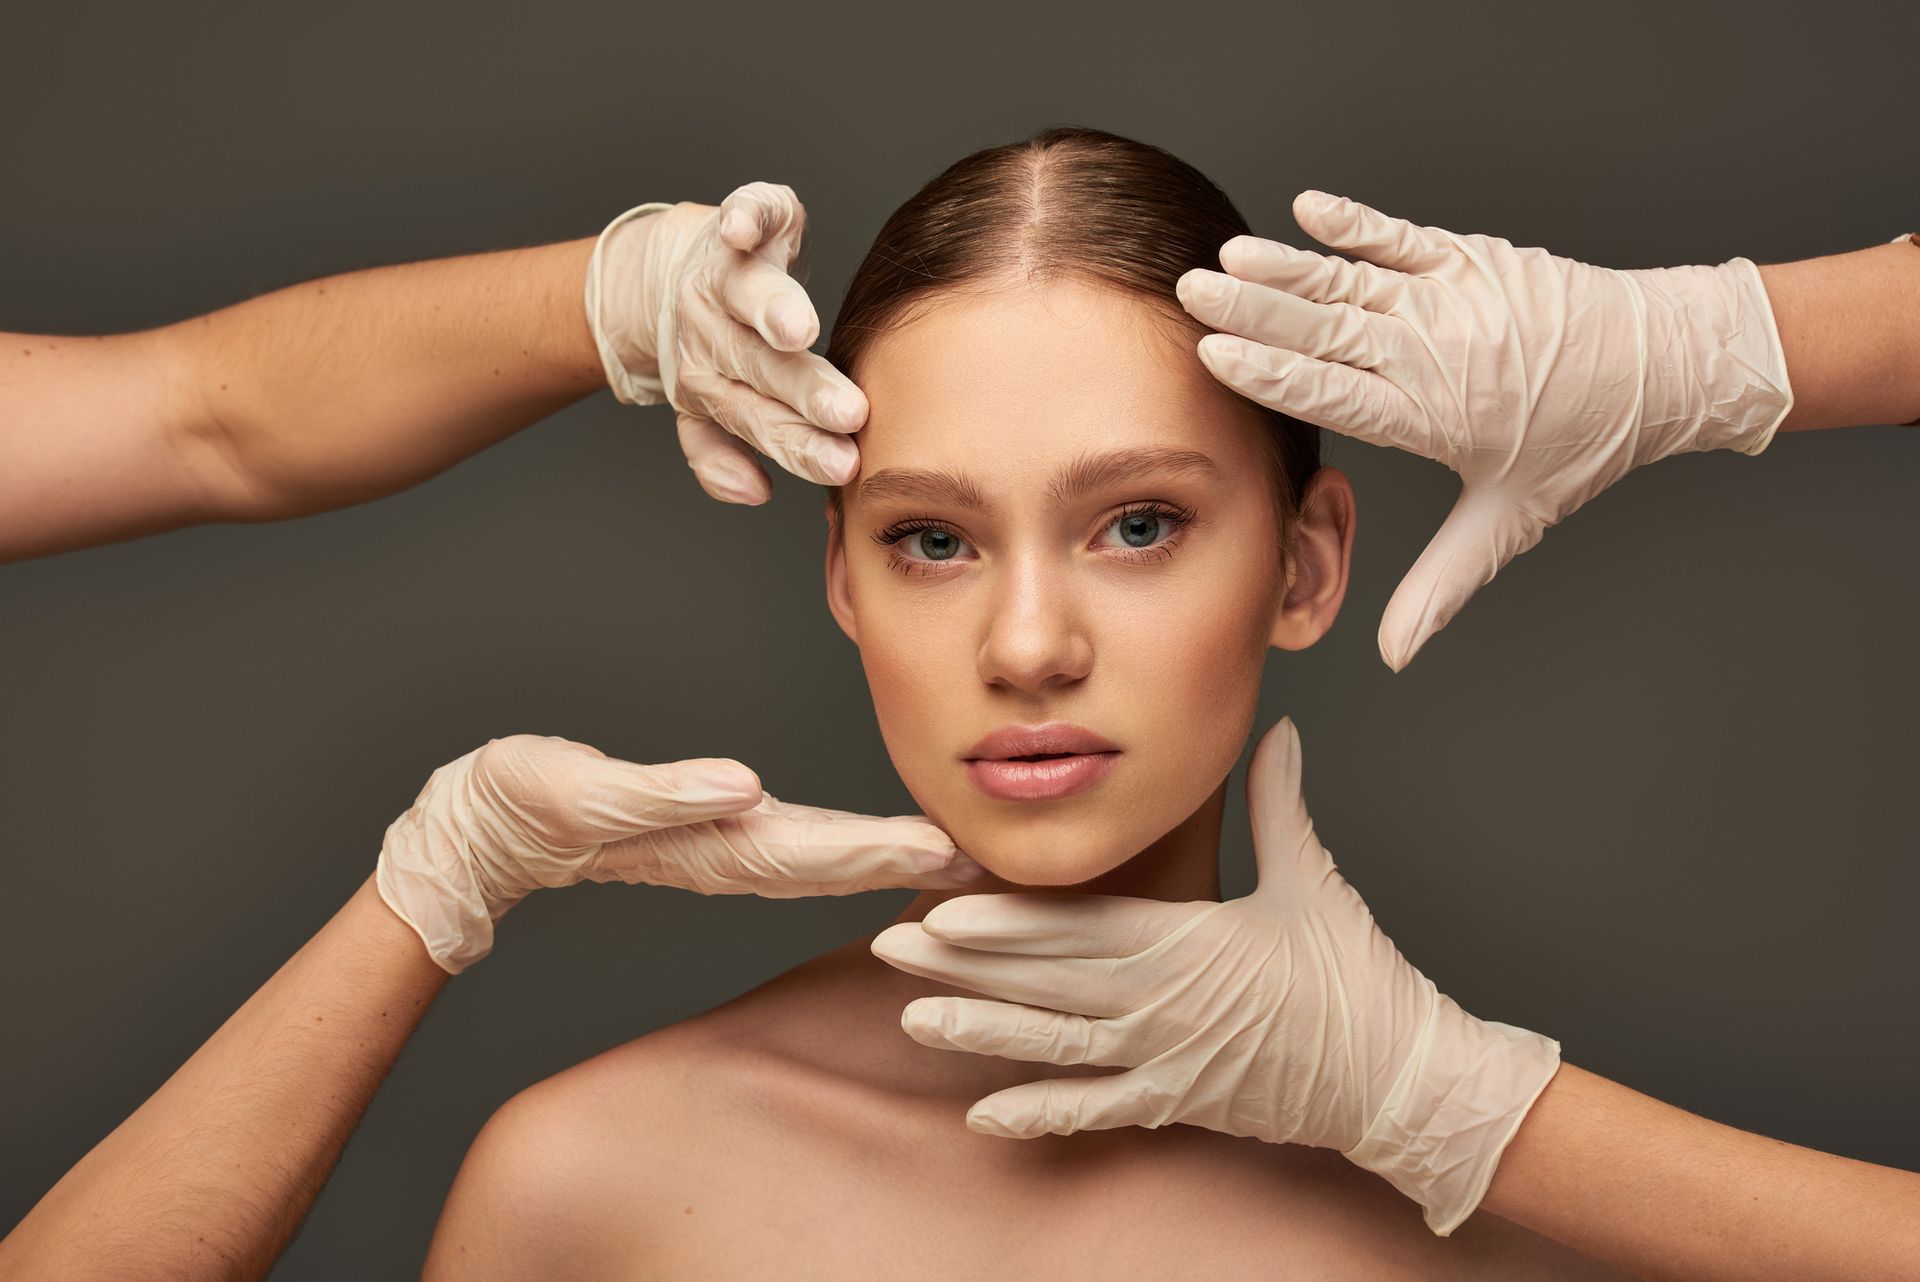 Filler Treatments at SkinMD in Dearborn, MI